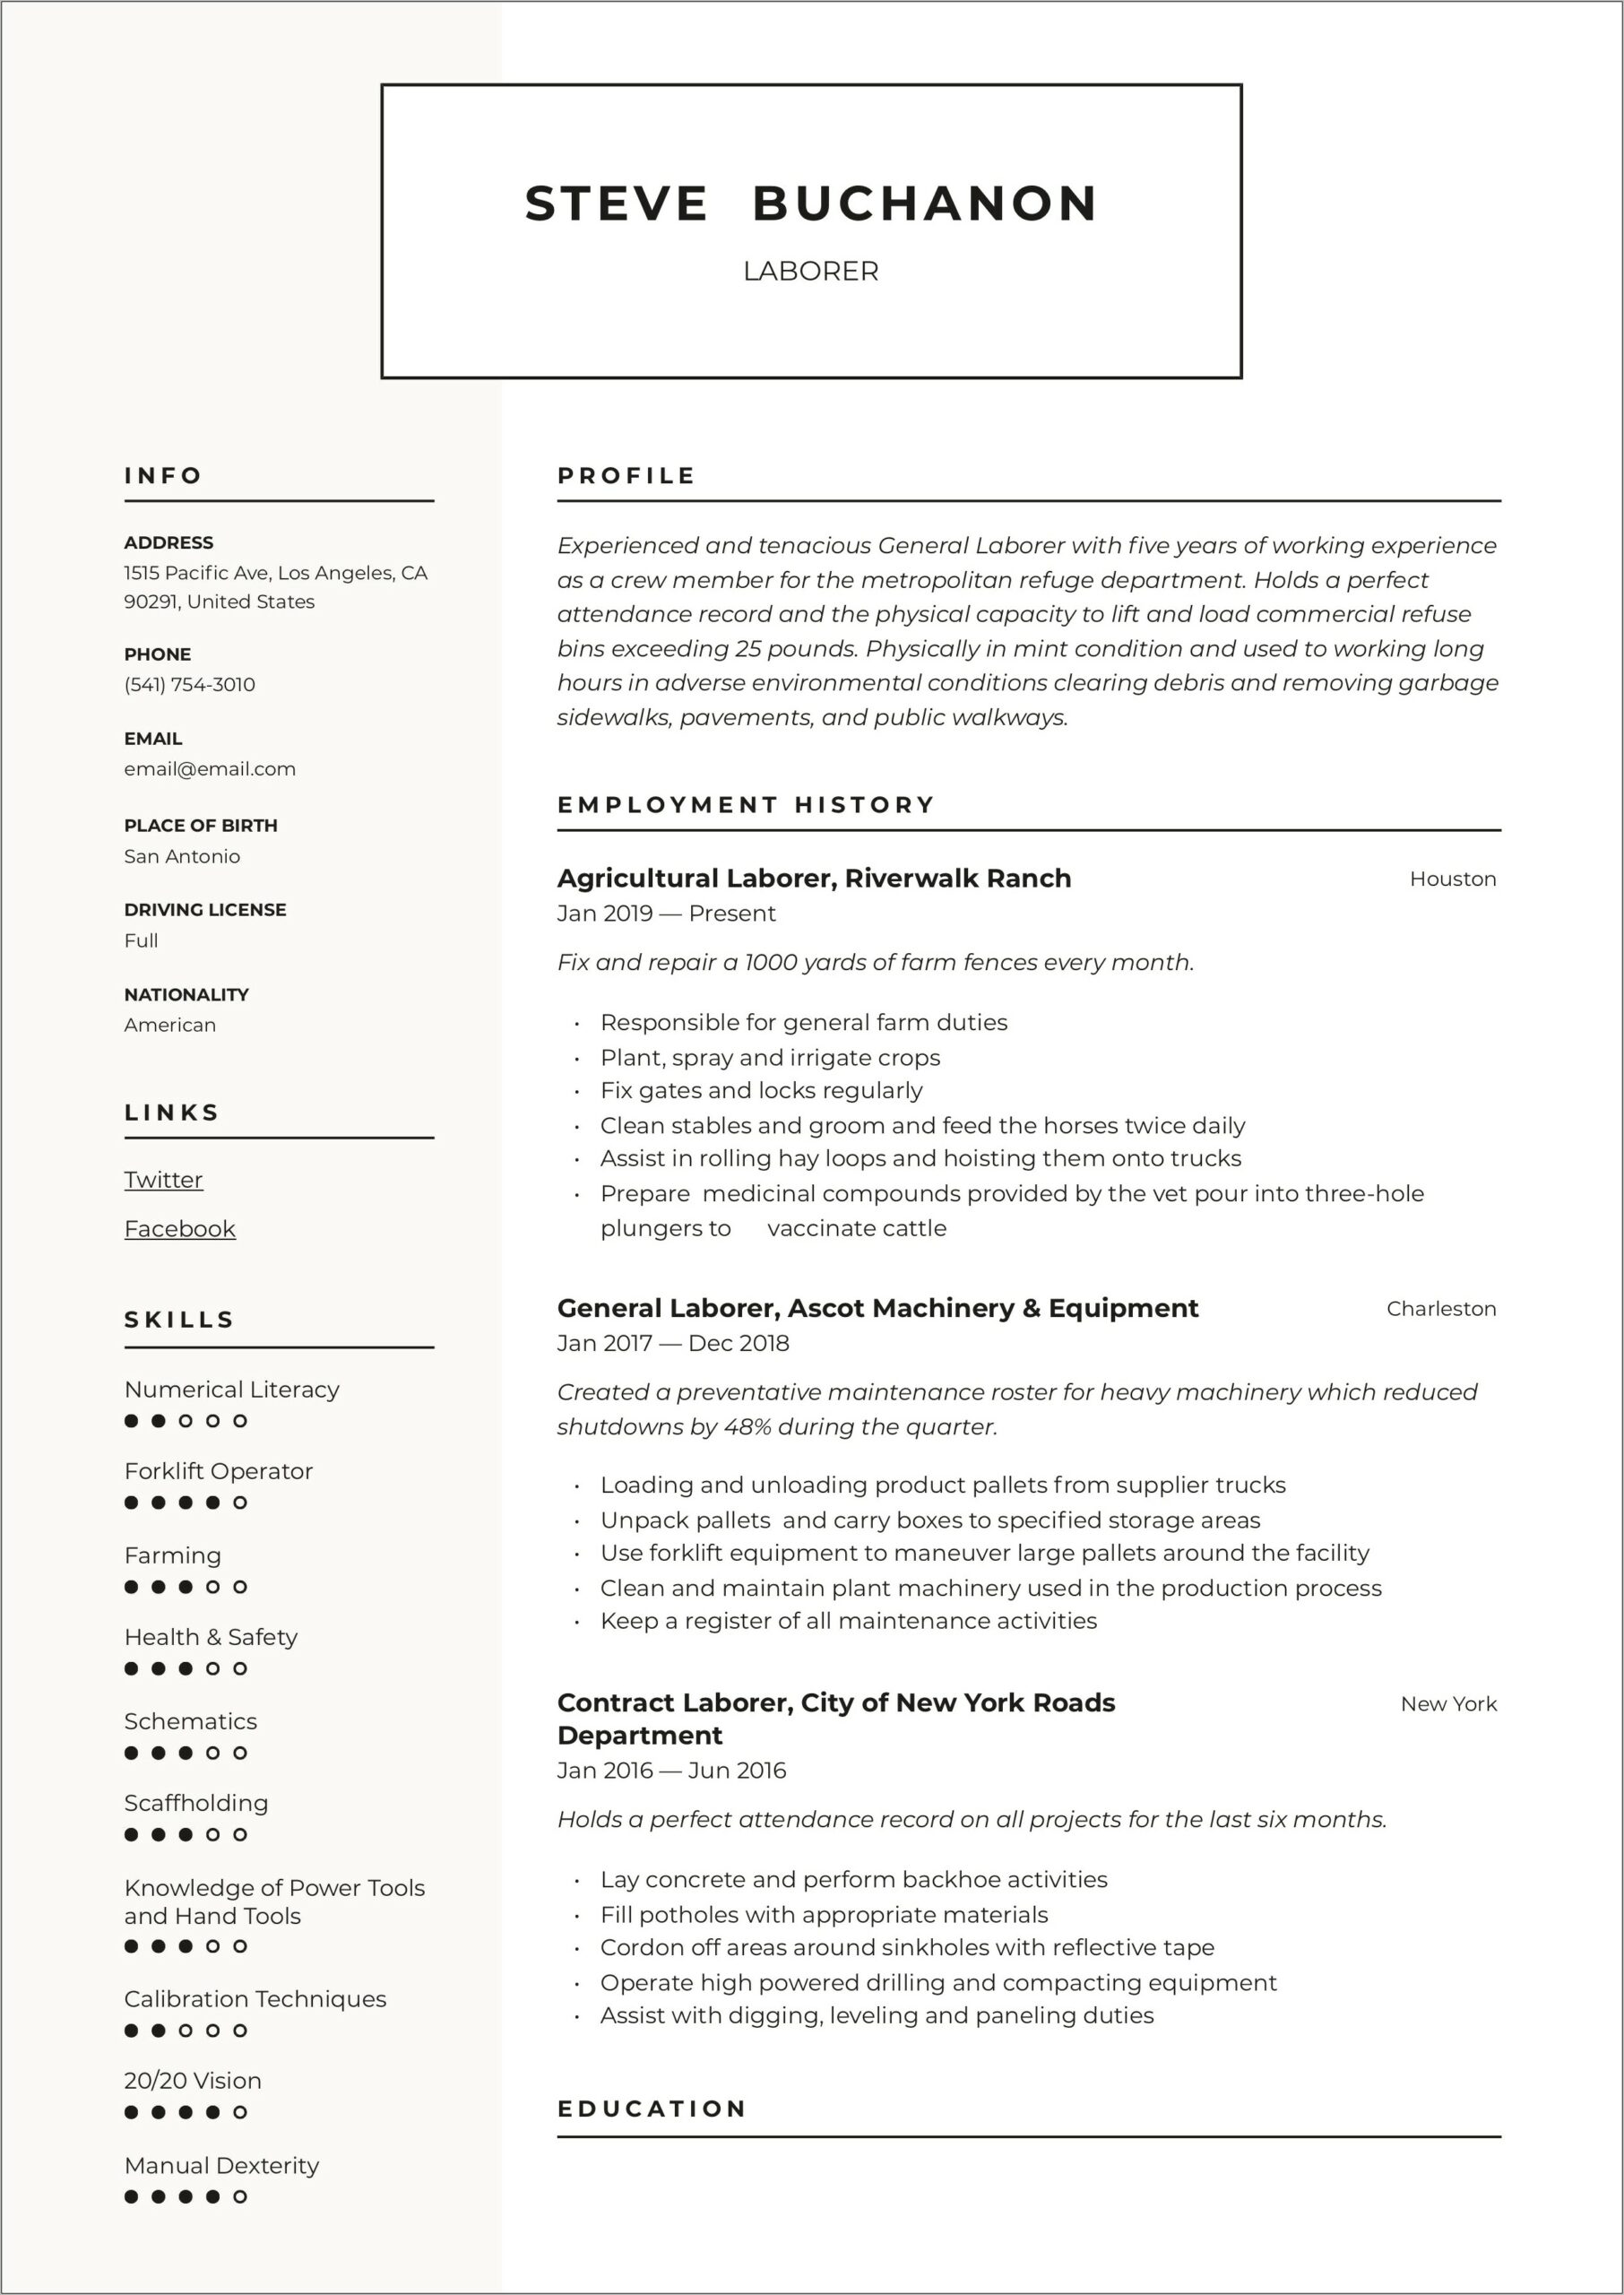 Sample Resumes For Labor Workers